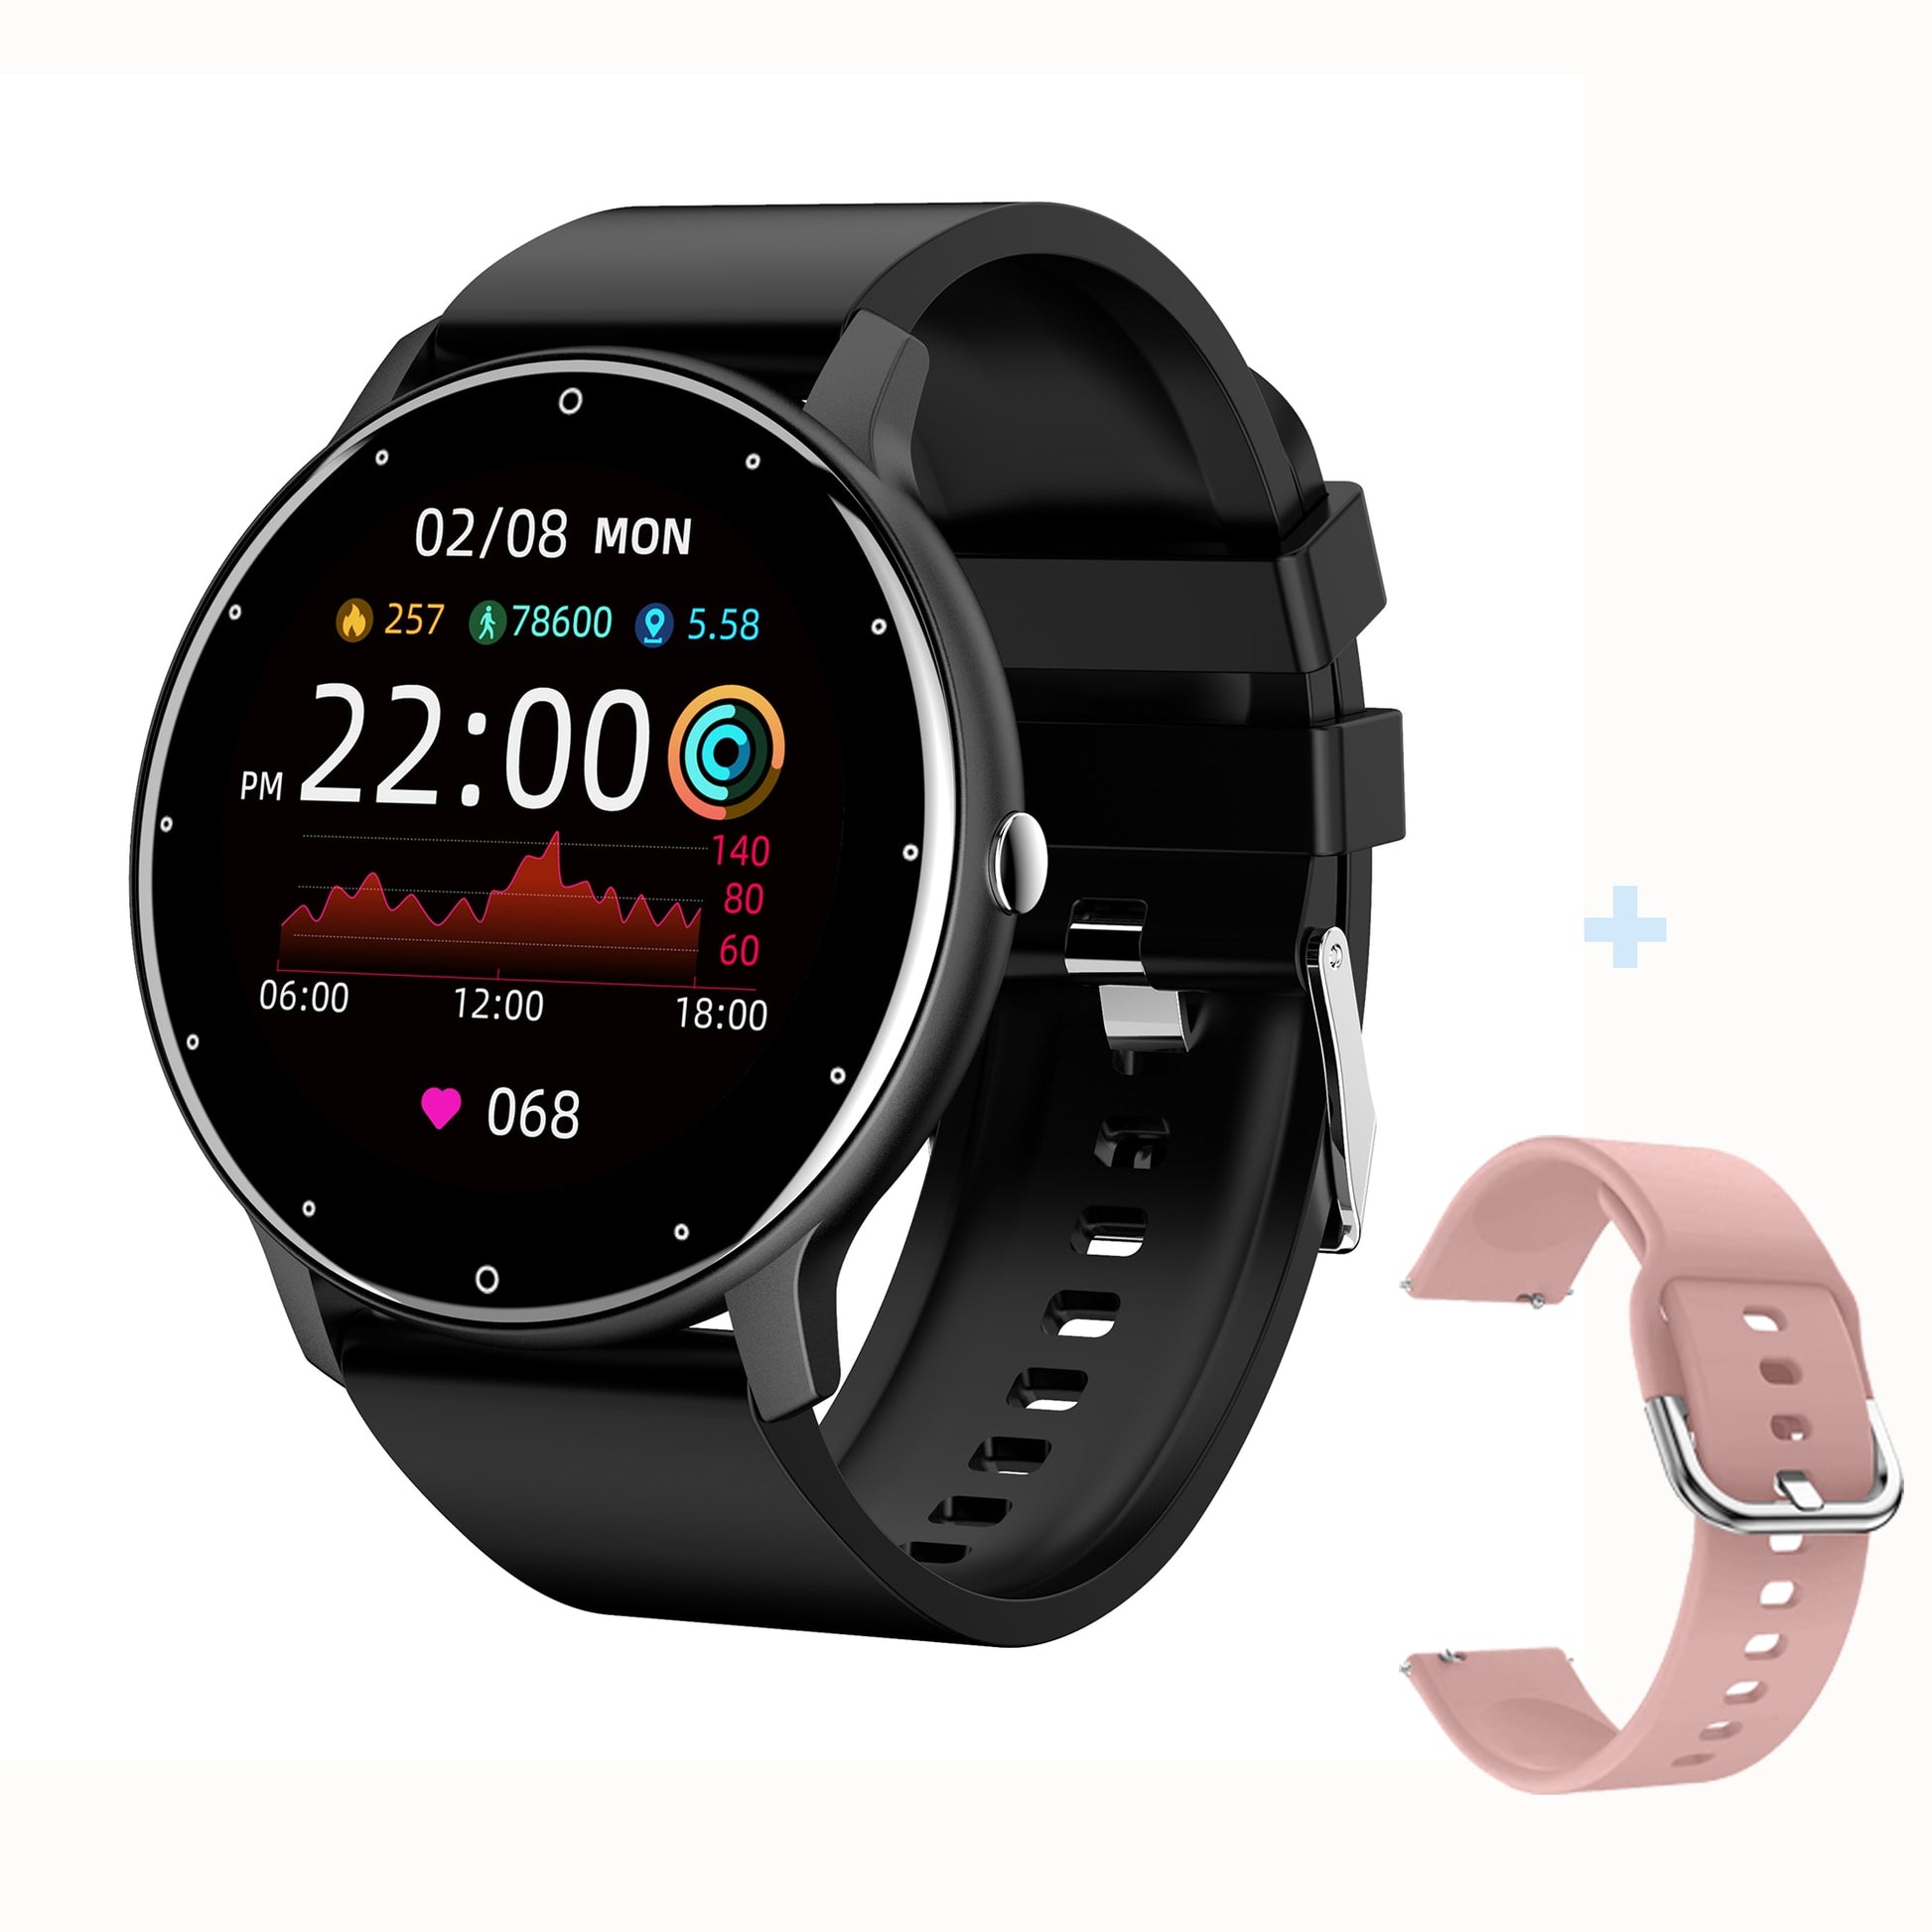 New Lady Sport Fitness Smartwatch Sleep Heart Rate Monitor Waterproof Watches For IOS & Android - onestopmegamall23